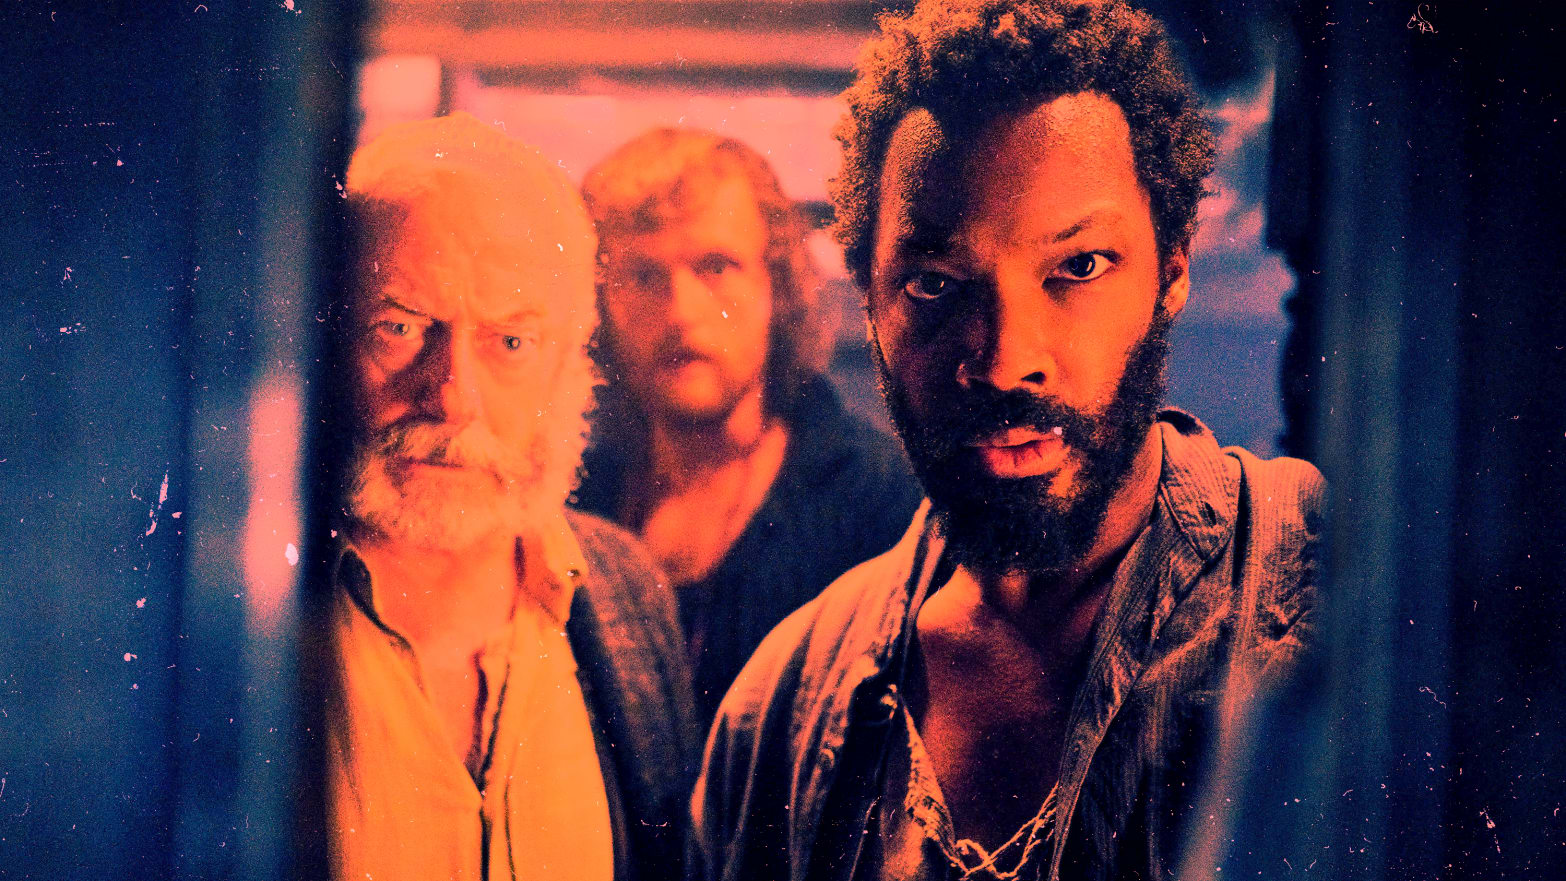 Liam Cunningham, Chris Walley and Corey Hawkins in The Last Voyage of the Demeter, directed by André Øvredal.